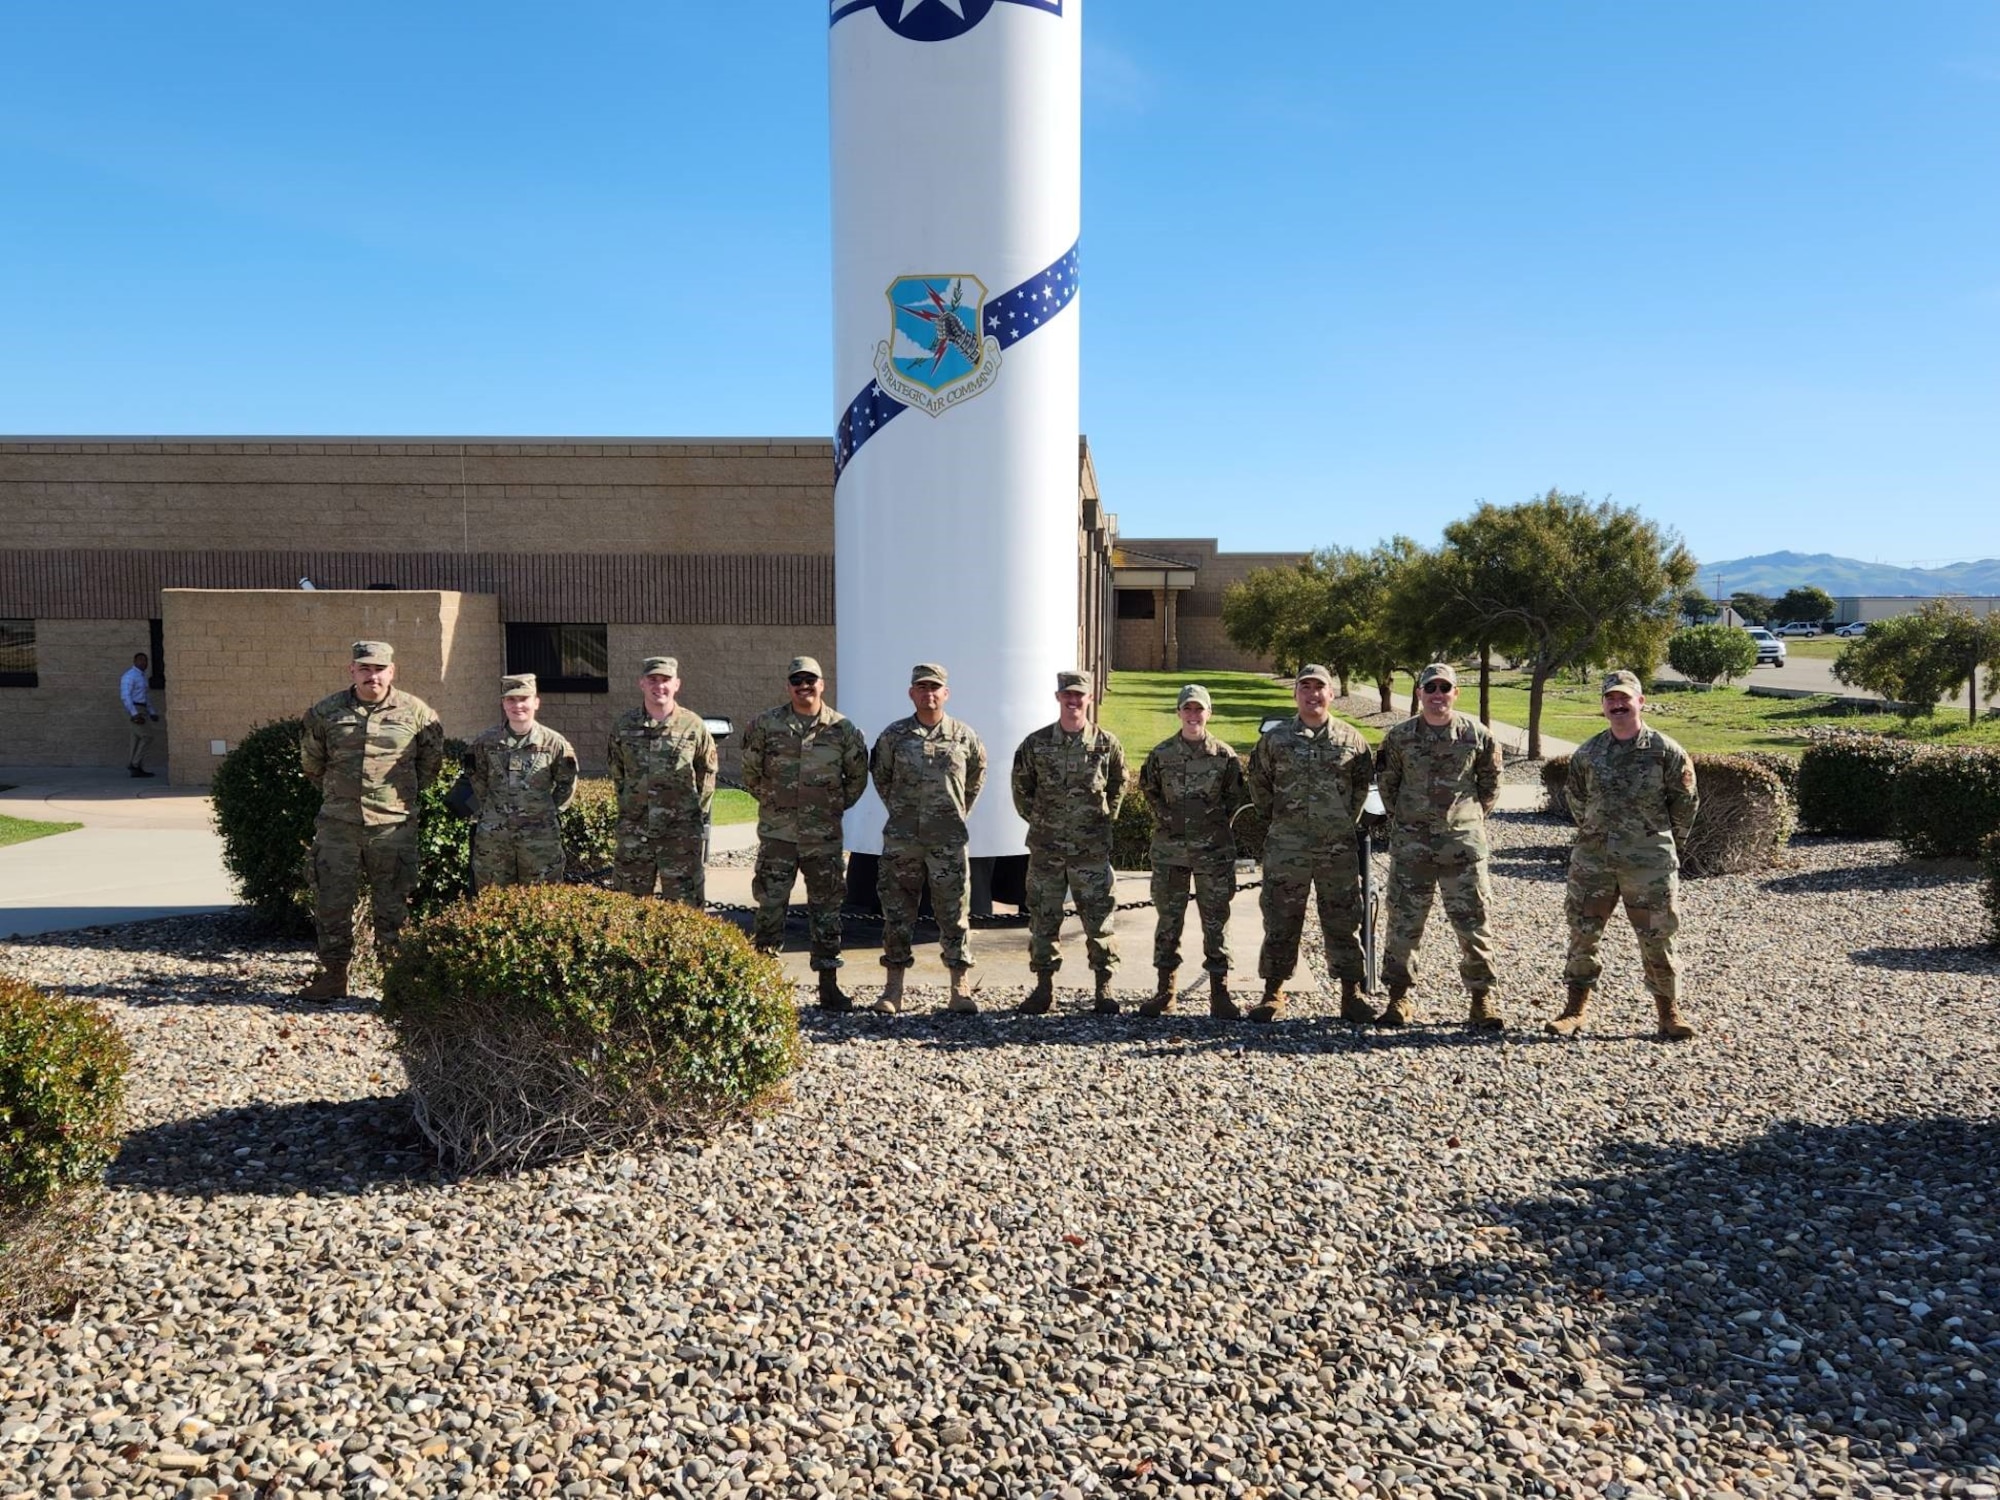 U.S. Airmen from the 791st Missile Maintenance Squadron (MMXS) pose for a photographer at Vandenberg Space Force Base, California. The 791st MMXS Airmen help ensure the Minute Man III meets operational standards. (Courtesy photo)